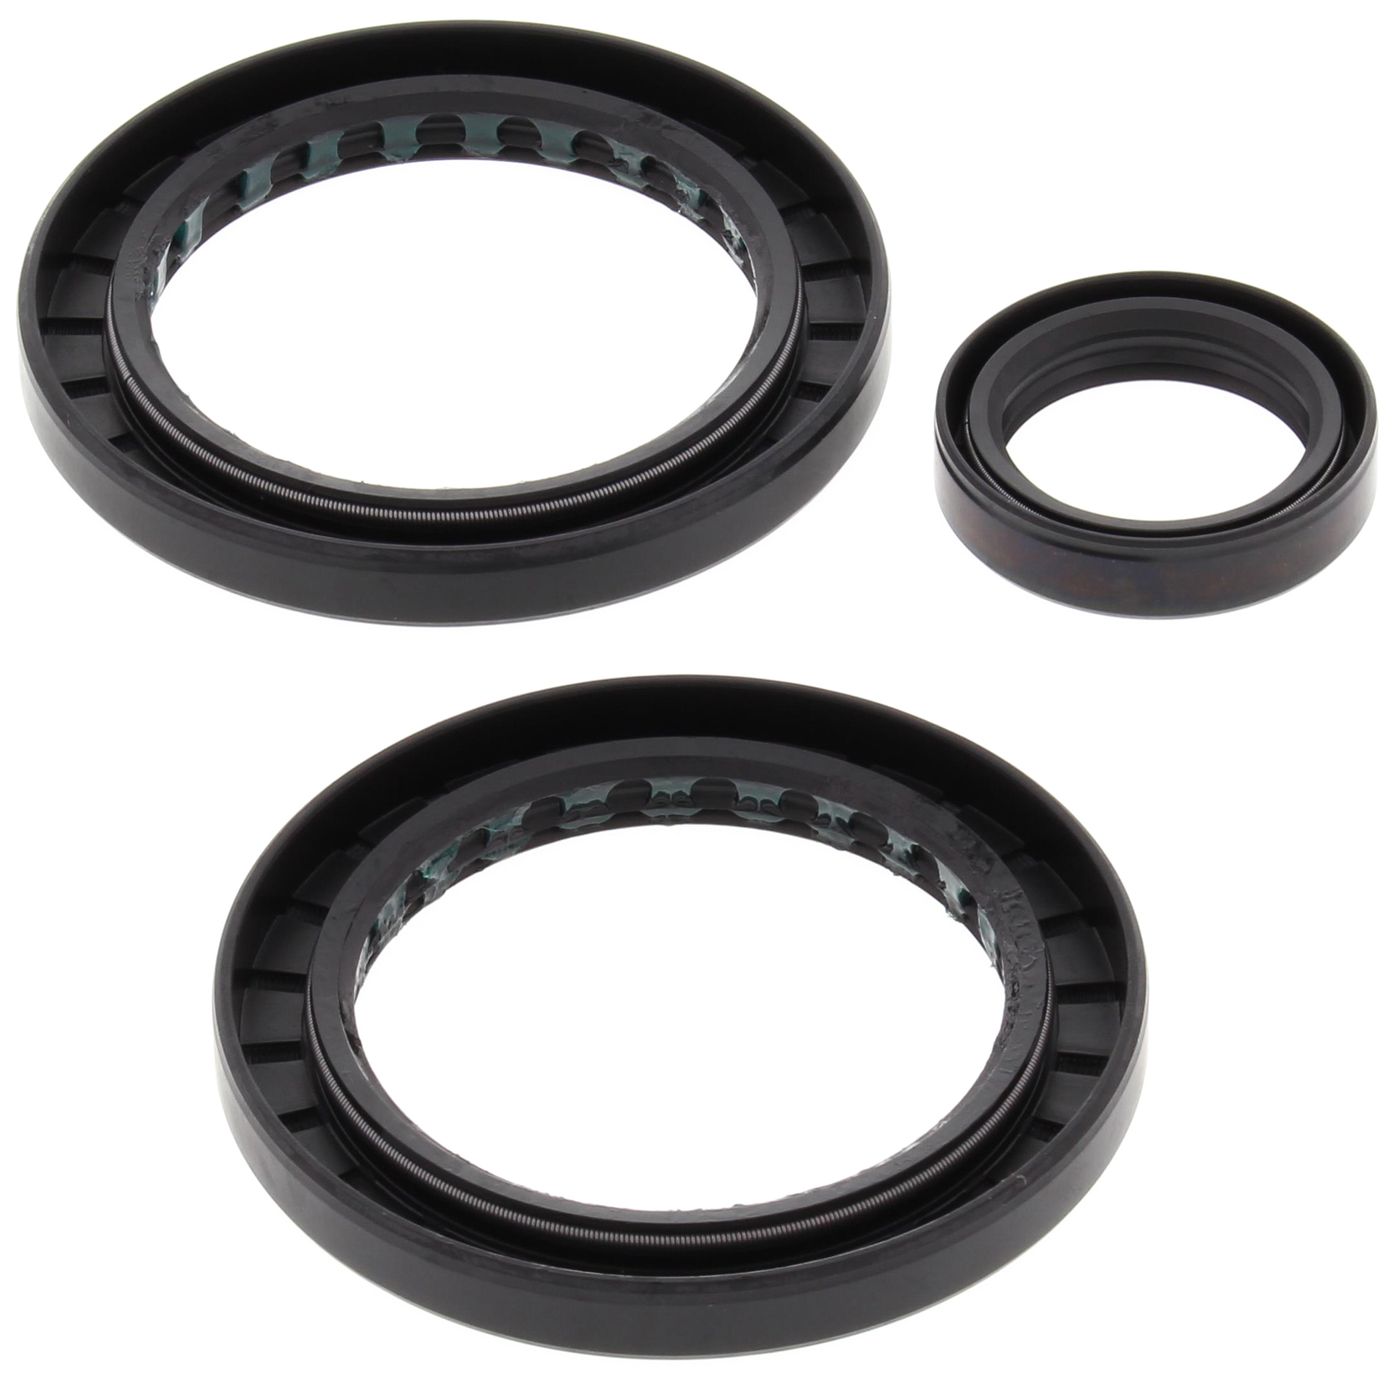 Wrp Diff Seal Kits - WRP252056-5 image